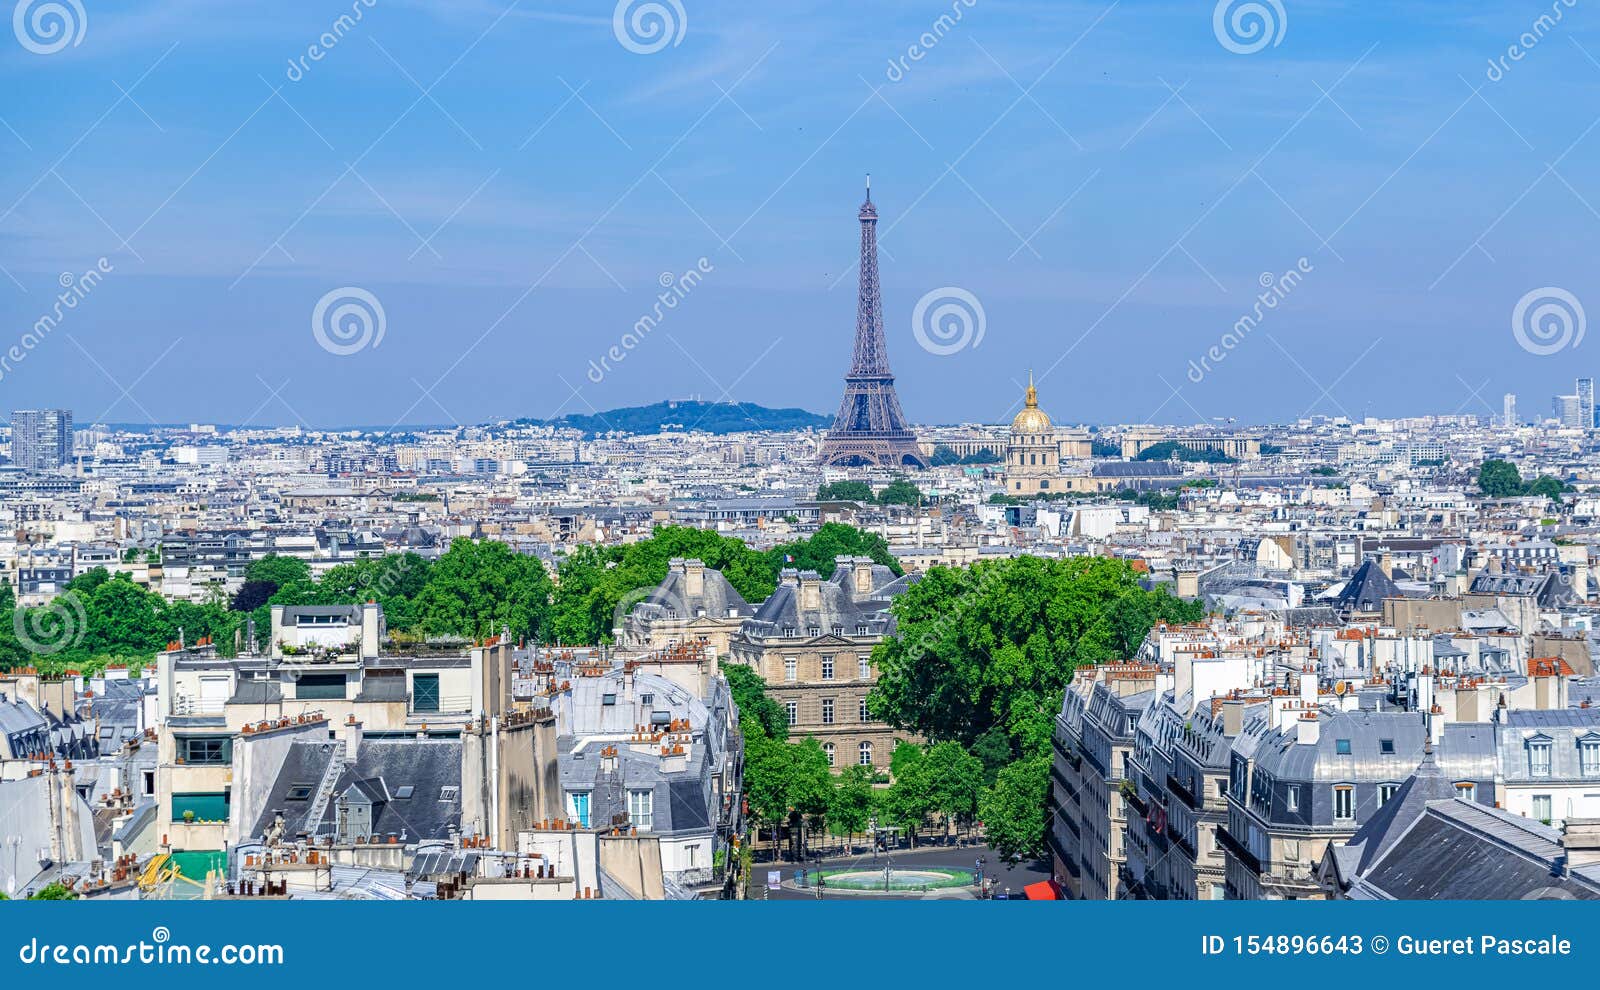 paris, typical roofs, aerial view